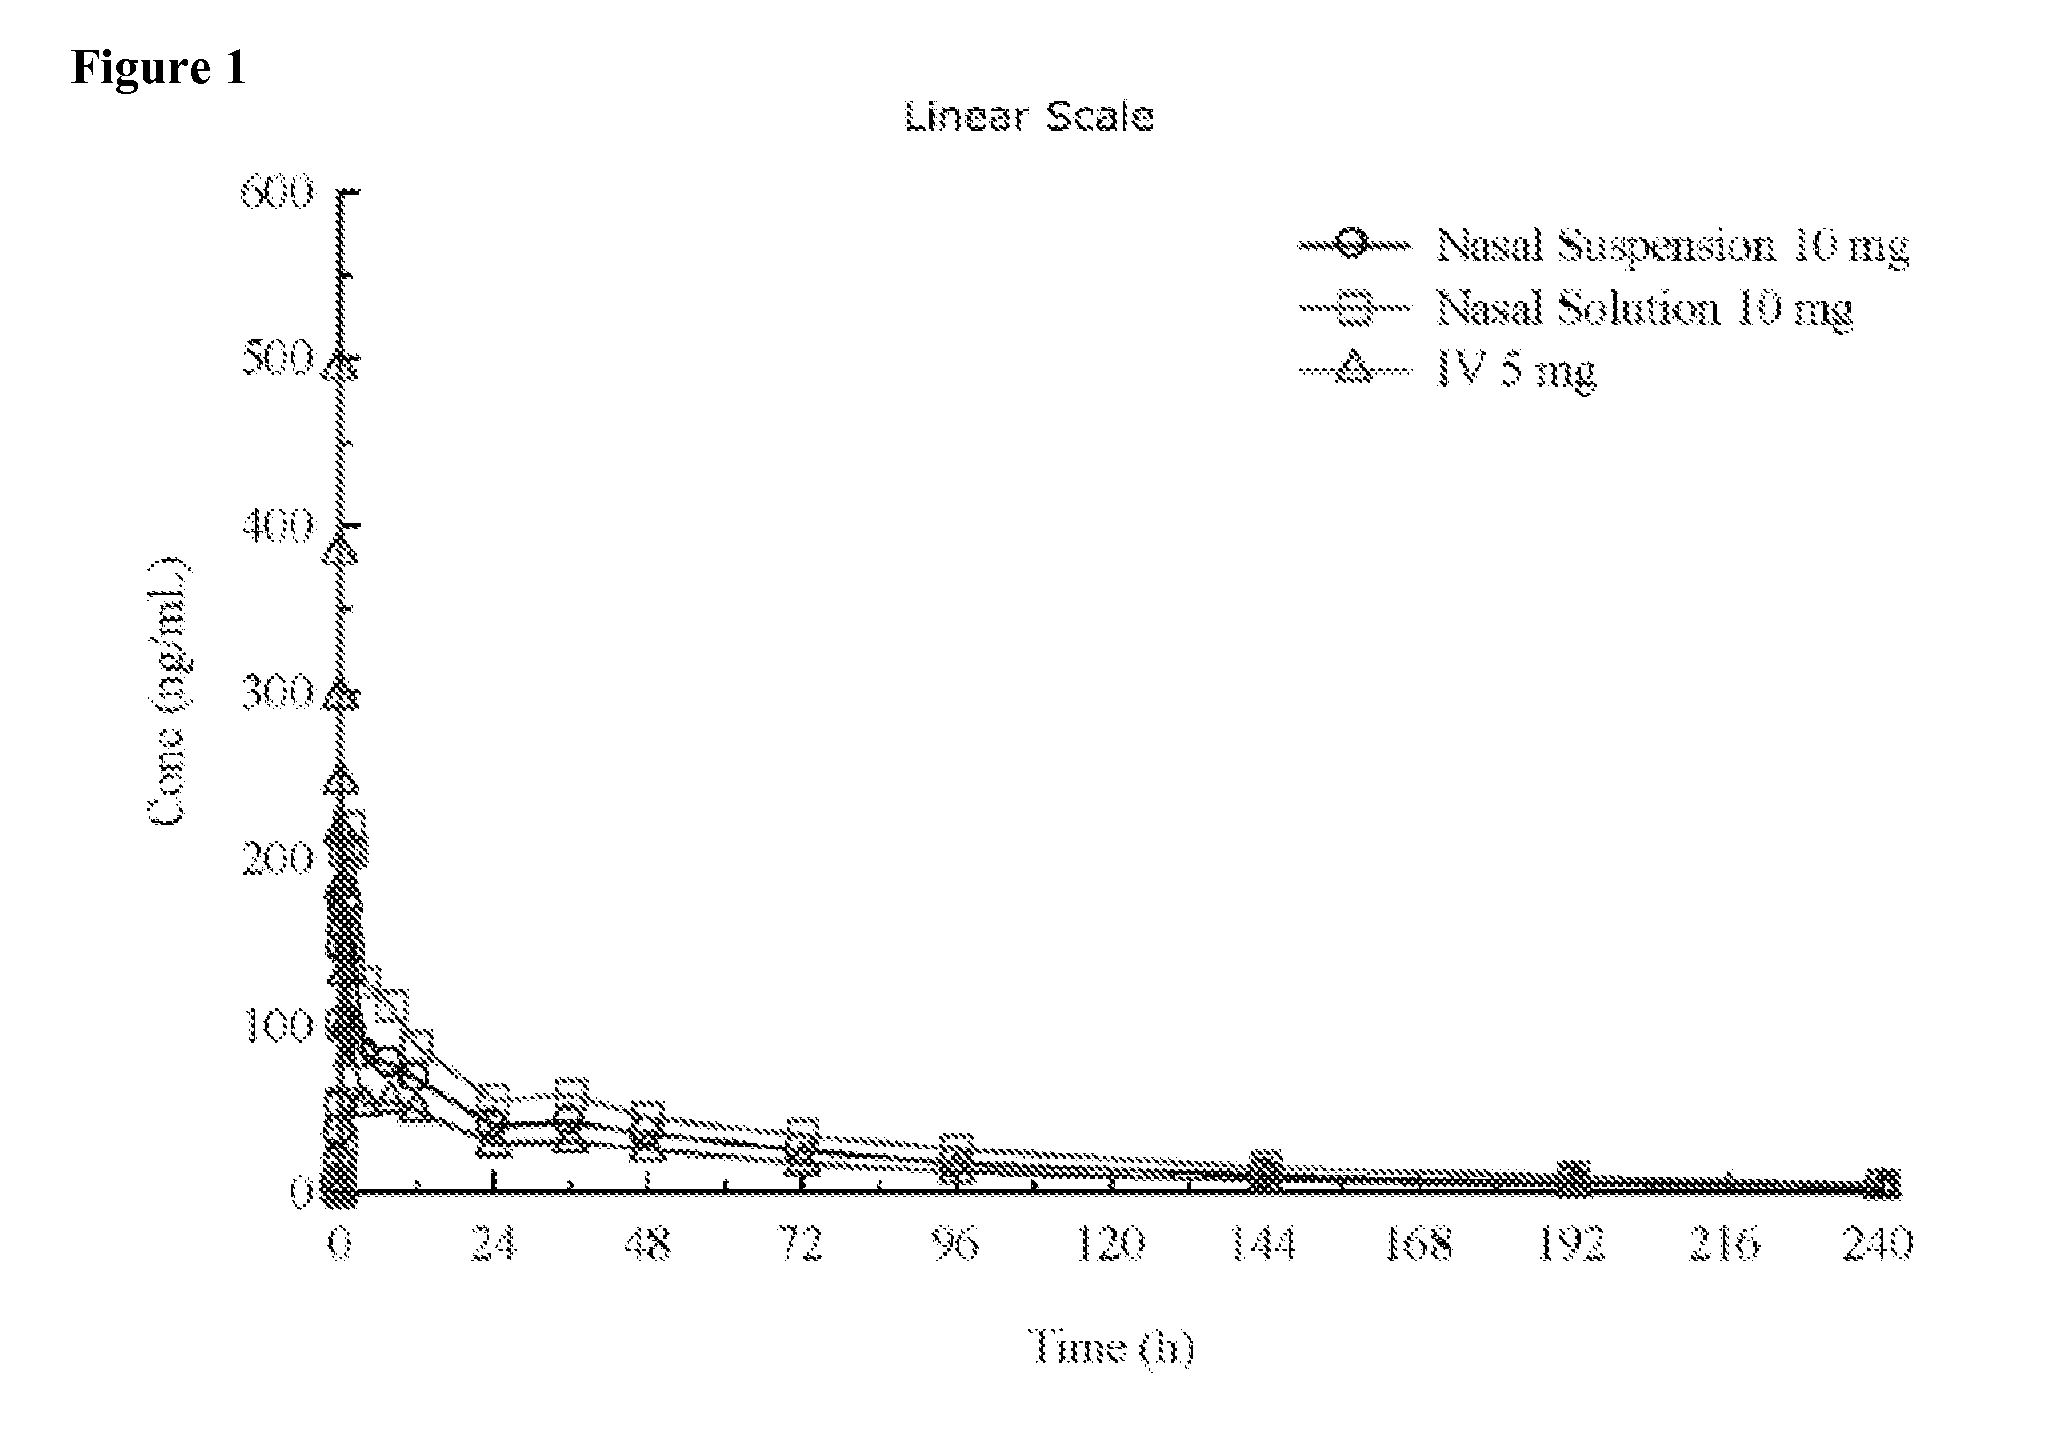 Administration of benzodiazepine compositions